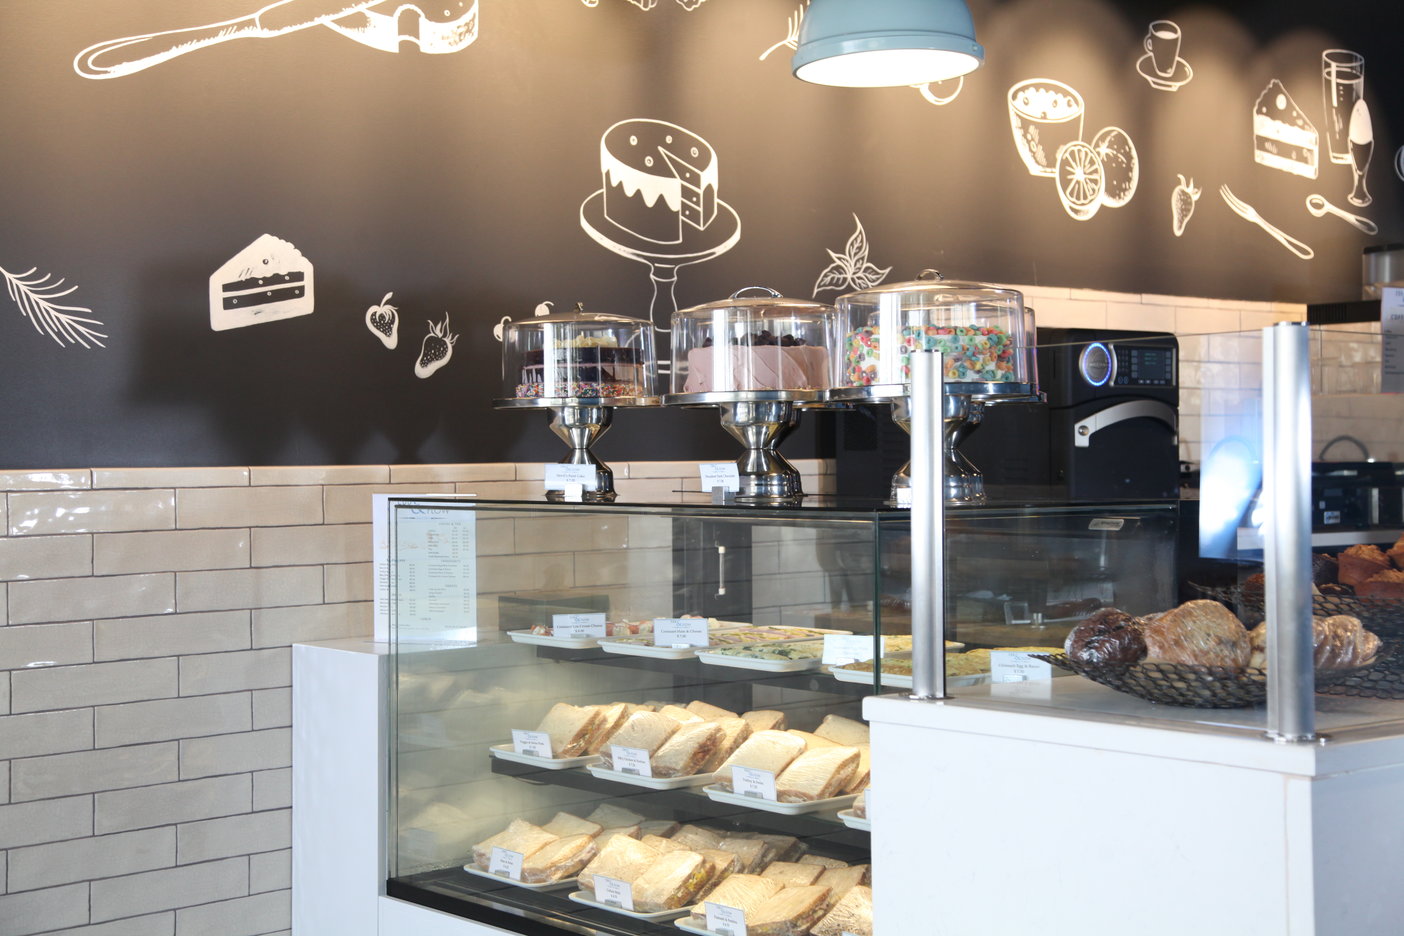 An inside look at Ebb & Flow, the new grab-and-go dining option at ONE°15 Brooklyn Marina. The concept is helmed by renowned pastry chef Francois Payard.